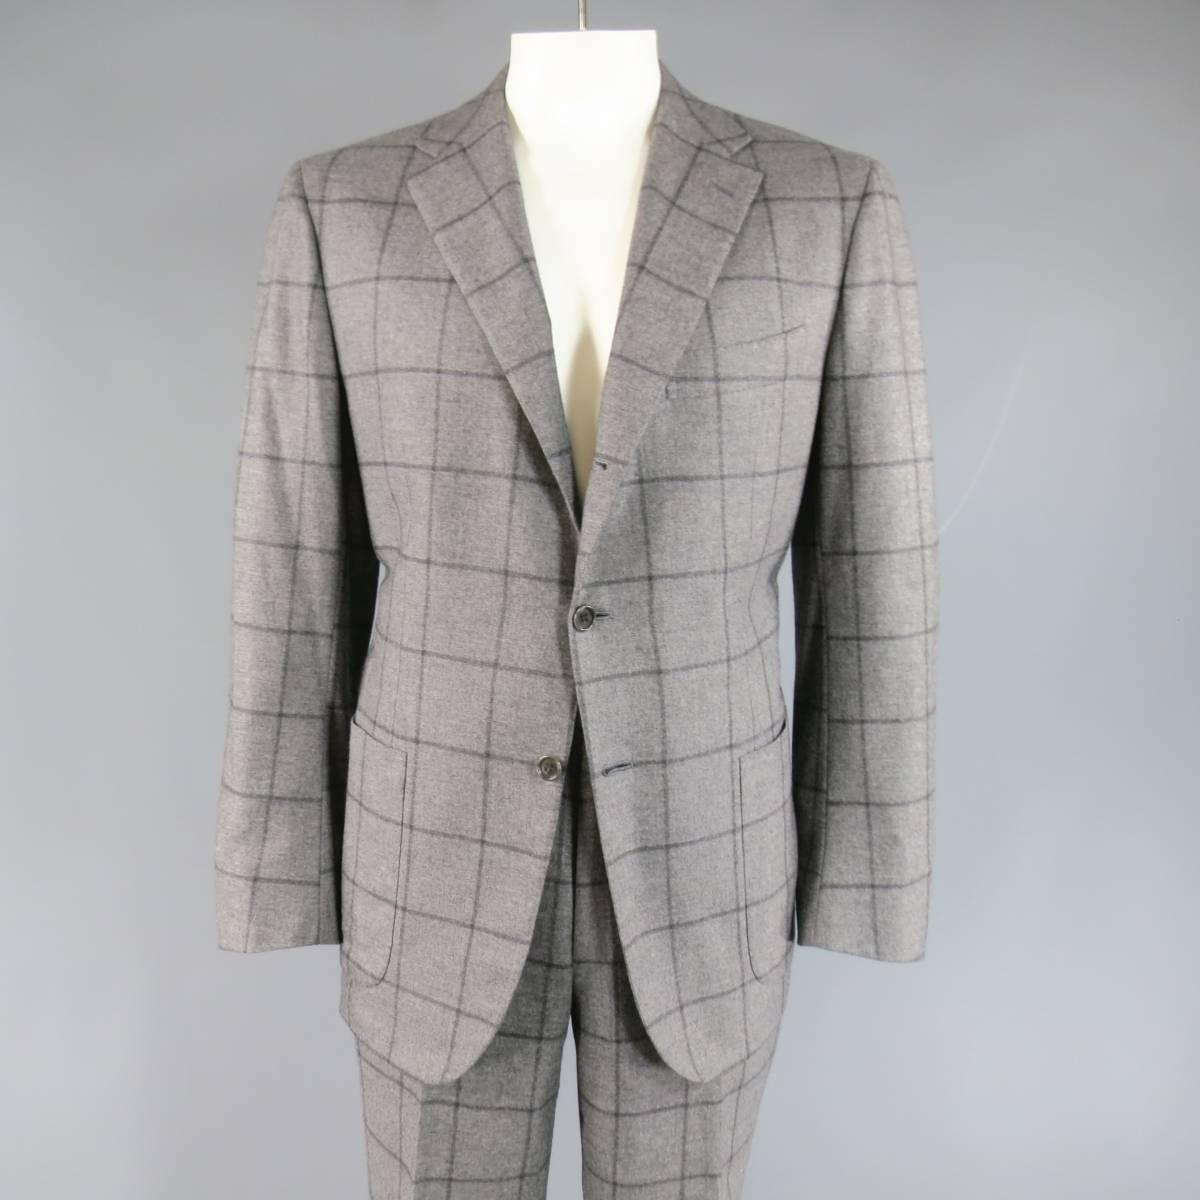 This chic KITON suit comes in a light gray and charcoal Windowpane print cashmere and includes a notch lapel, functional button sleeve, double vented , three button sport coat with patch pockets and matching flat front, cuffed dress pants. Small